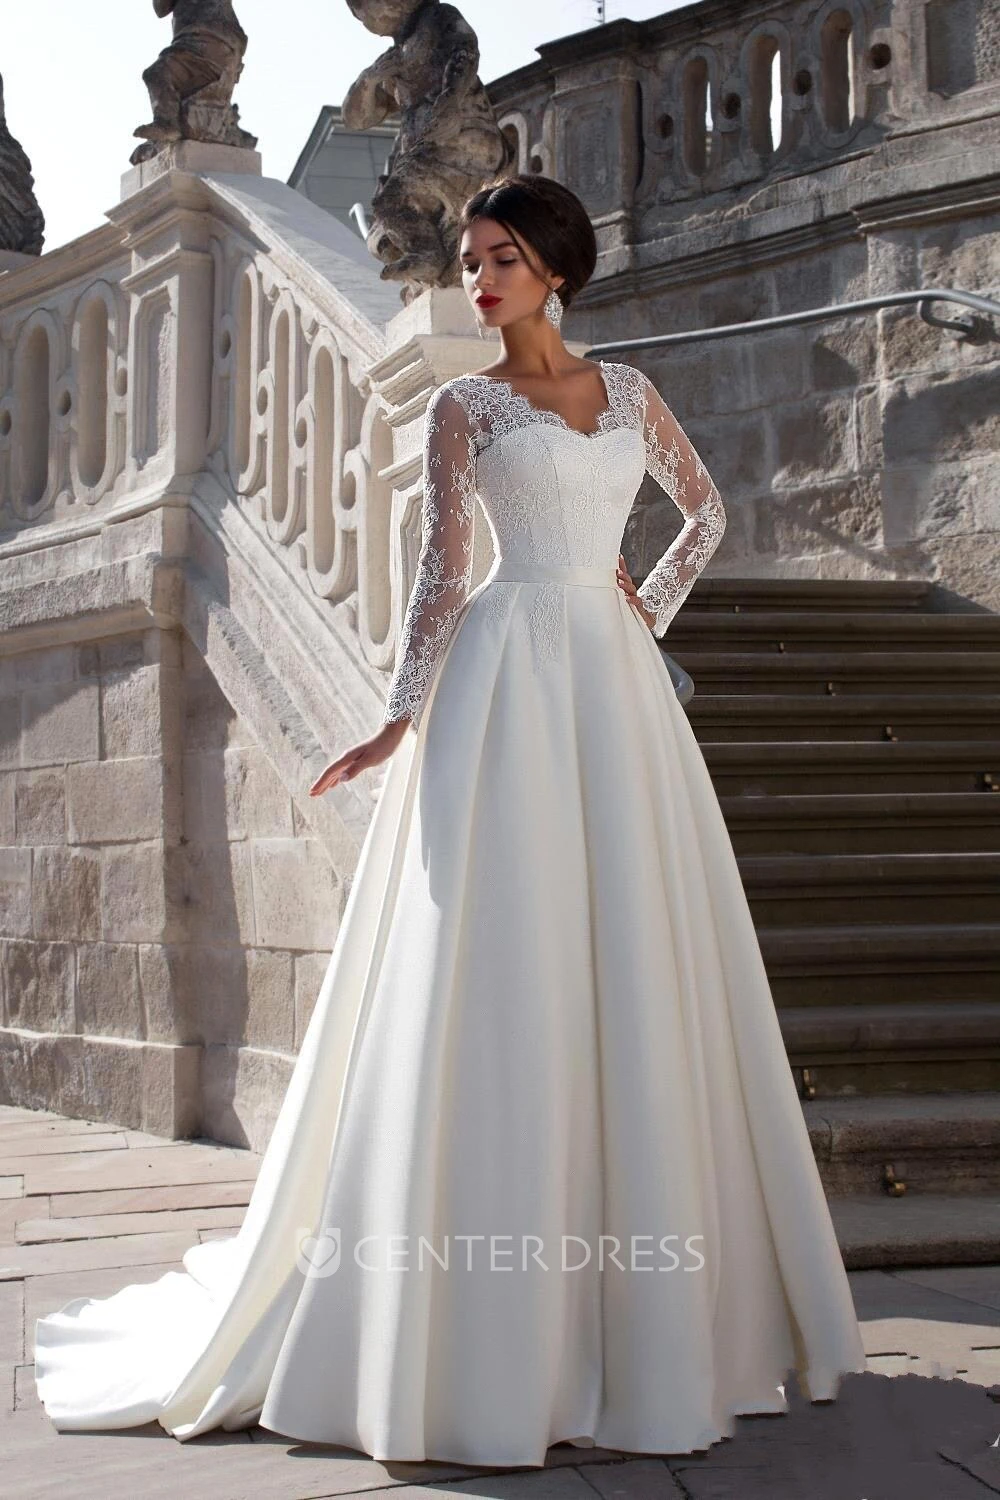 A-Line Long Jewel-Neck Illusion-Sleeve Empire Corset-Back Chiffon Dress  With Beading And Pleatings - UCenter Dress